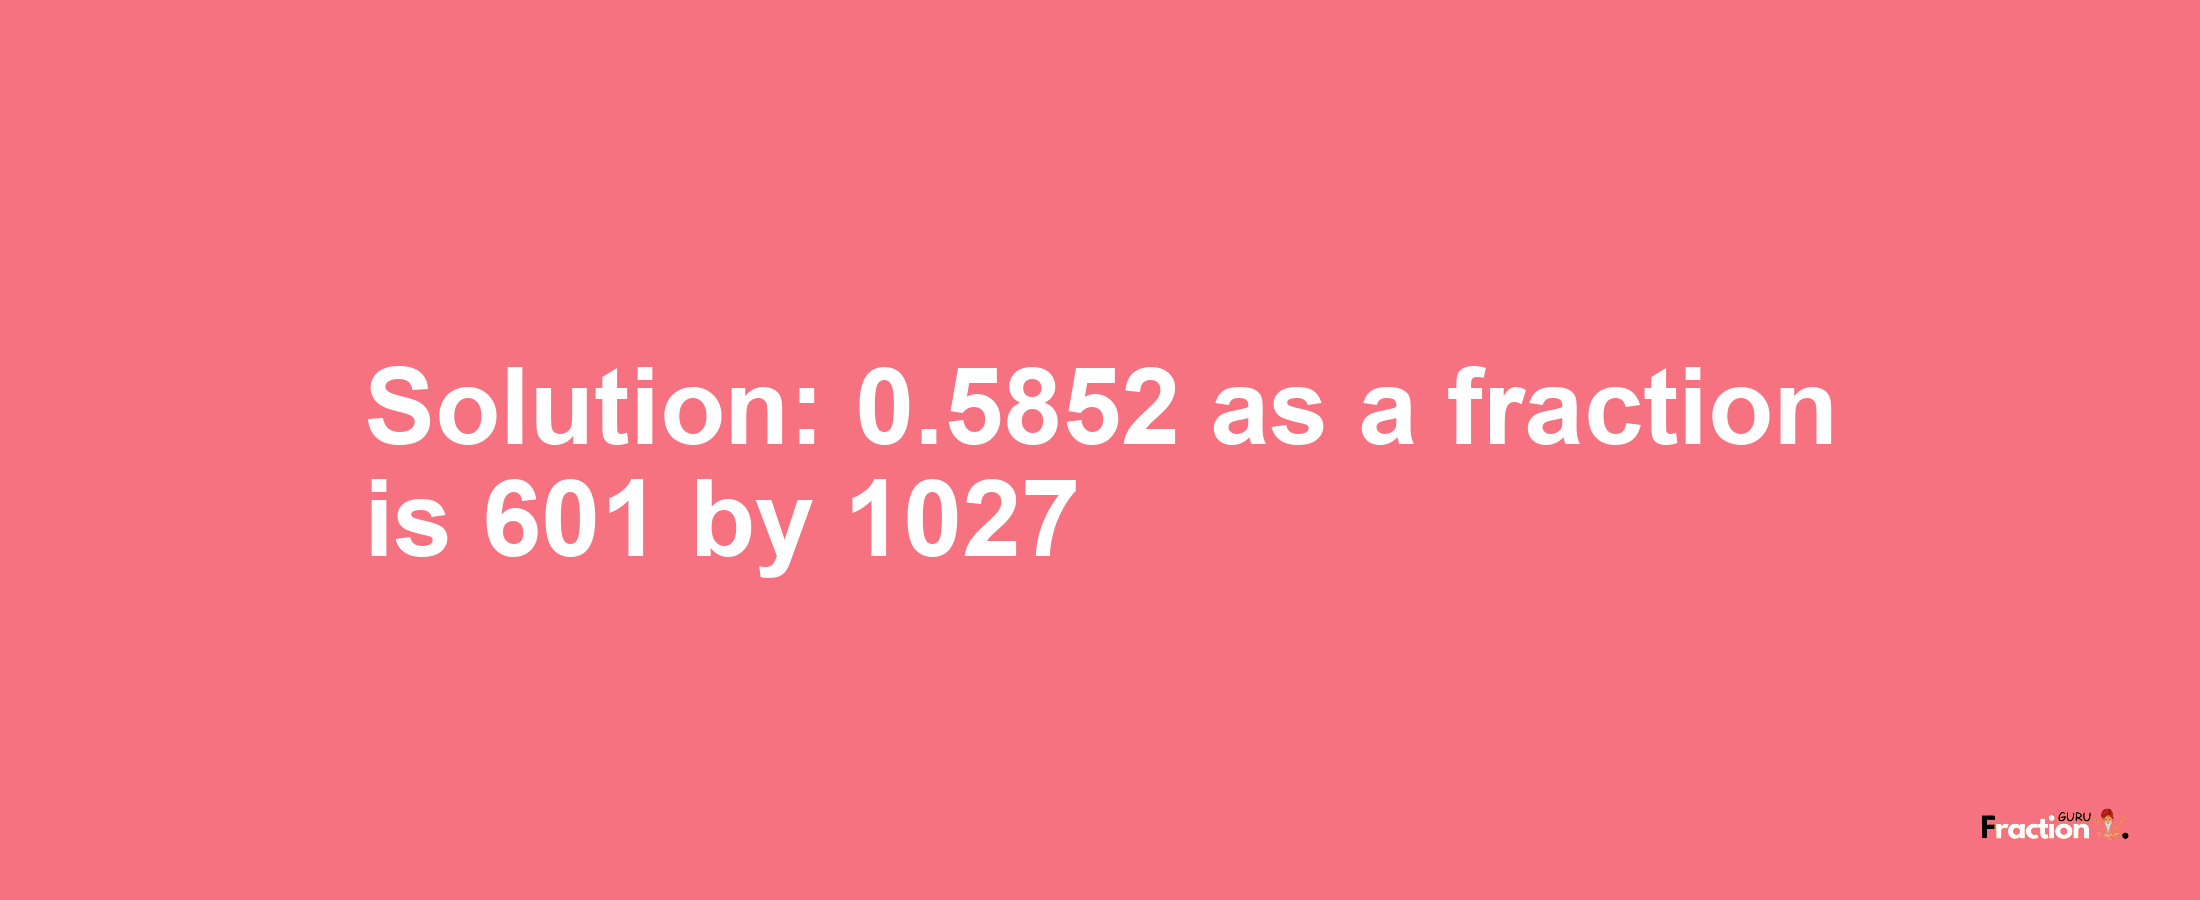 Solution:0.5852 as a fraction is 601/1027